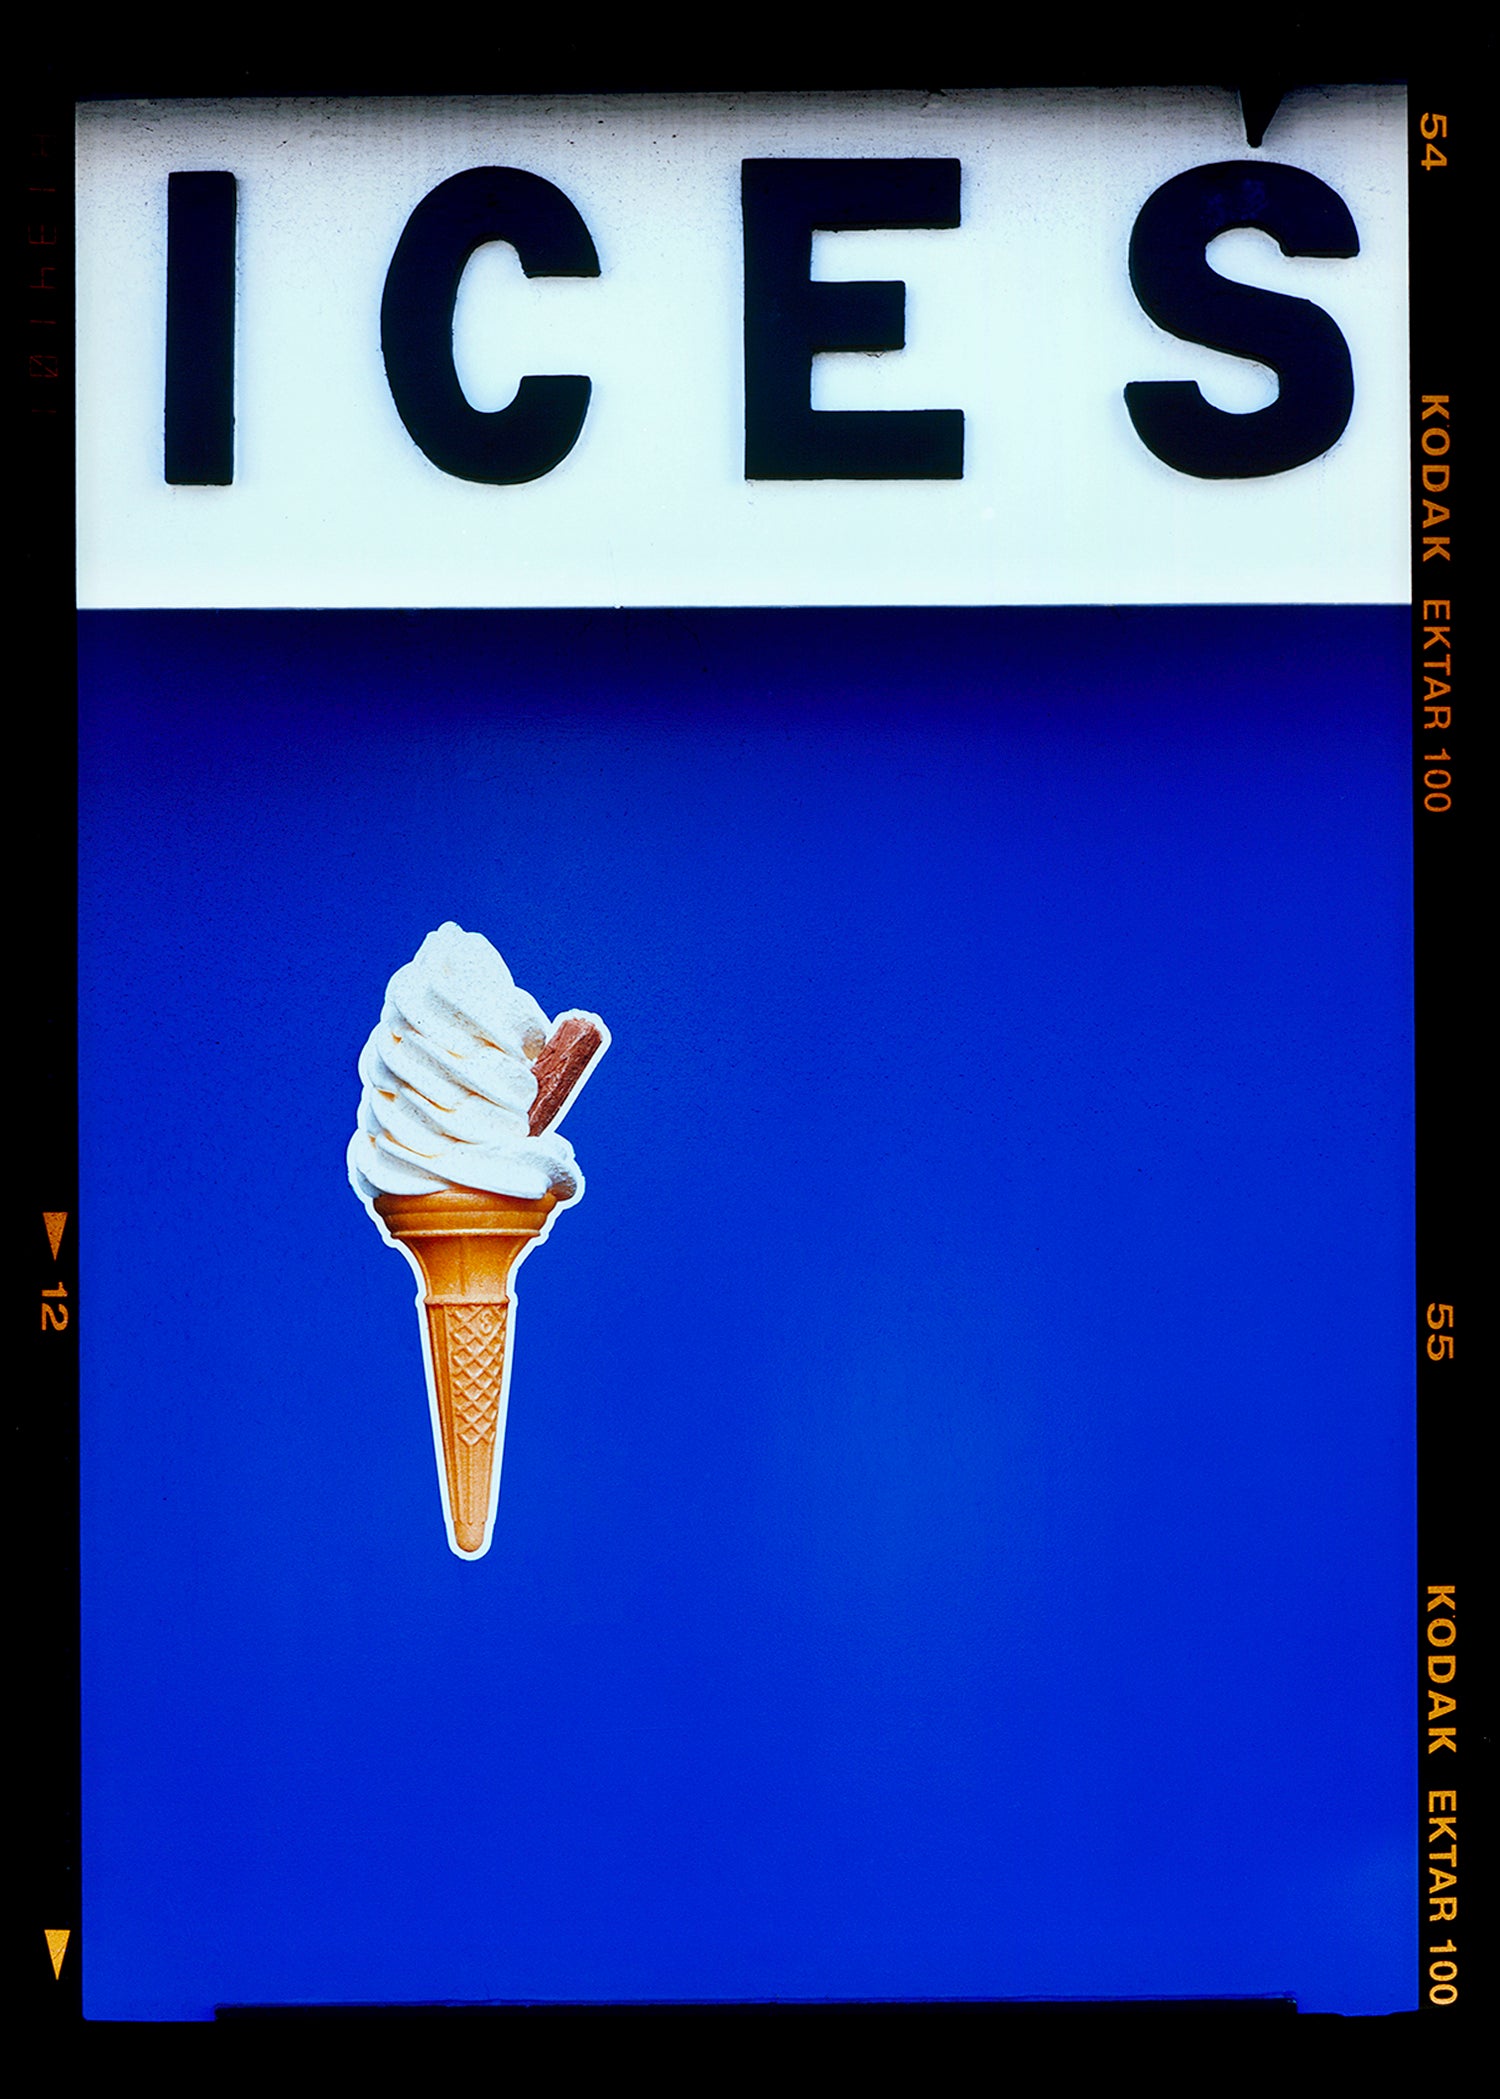 Richard Heeps ICES heading with an ice cream cone and a blue background